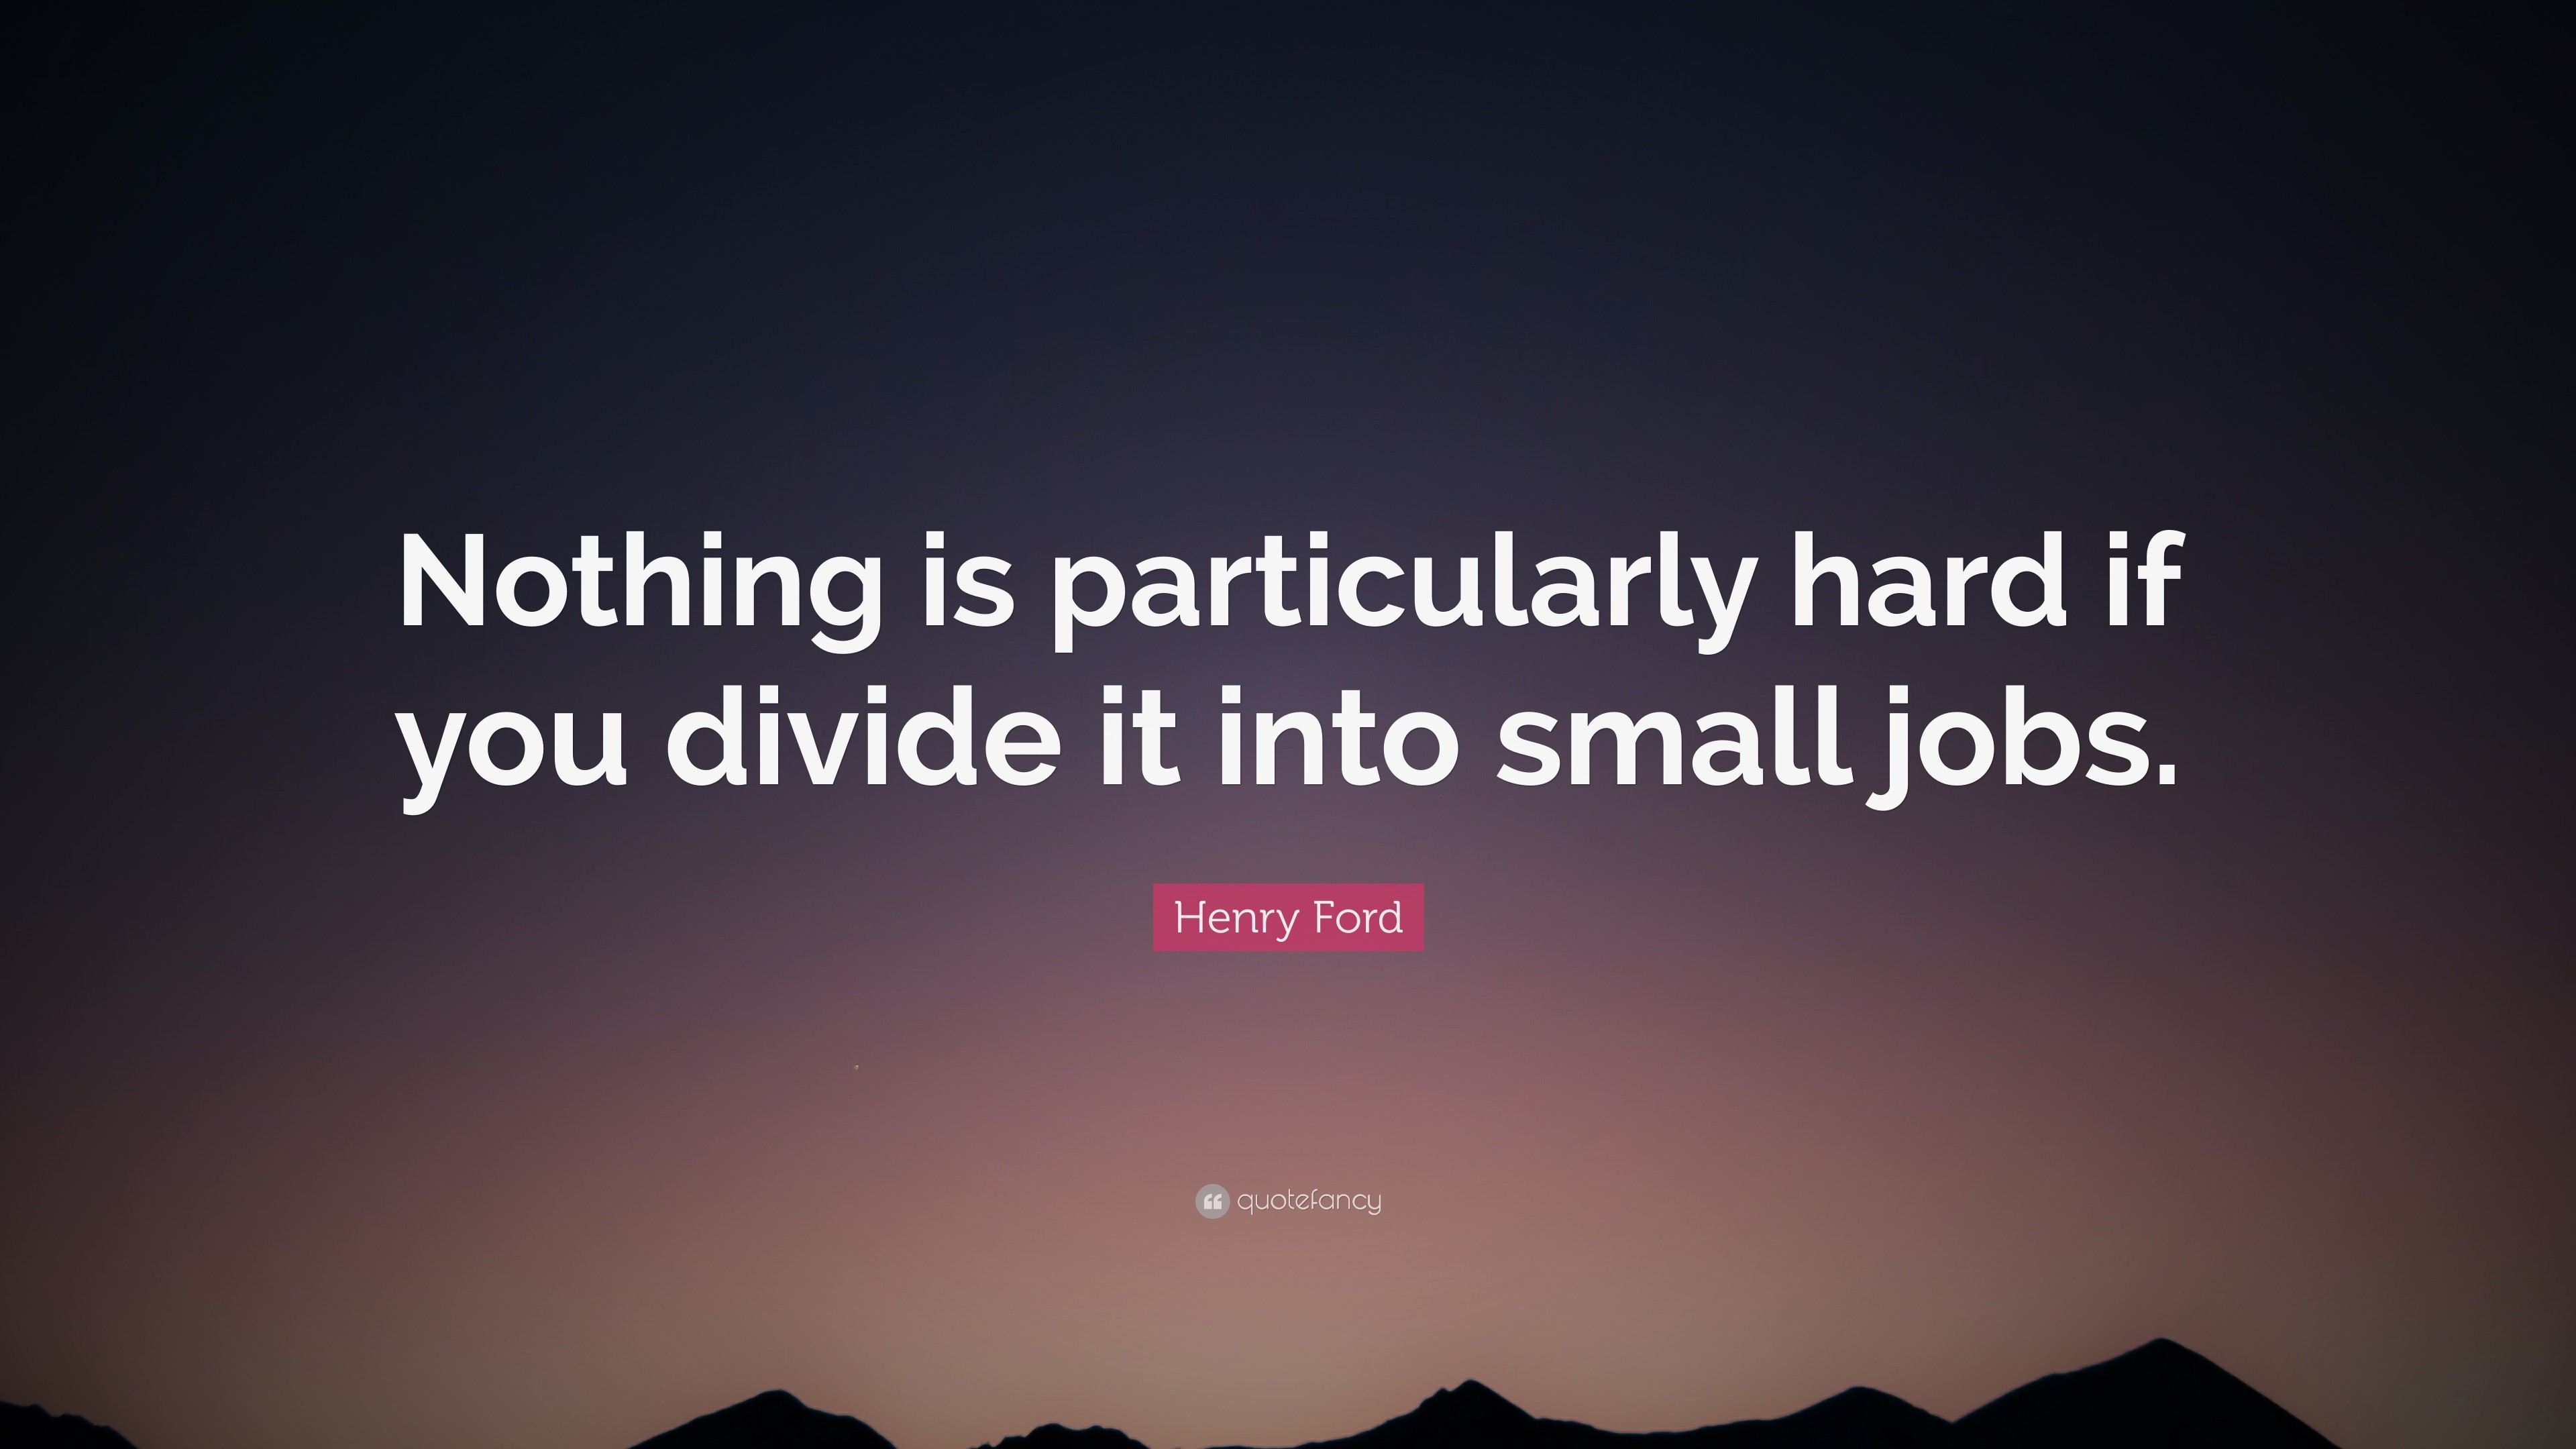 3840x2160 Henry Ford Quote: “Nothing is particularly hard if you divide it into small  jobs